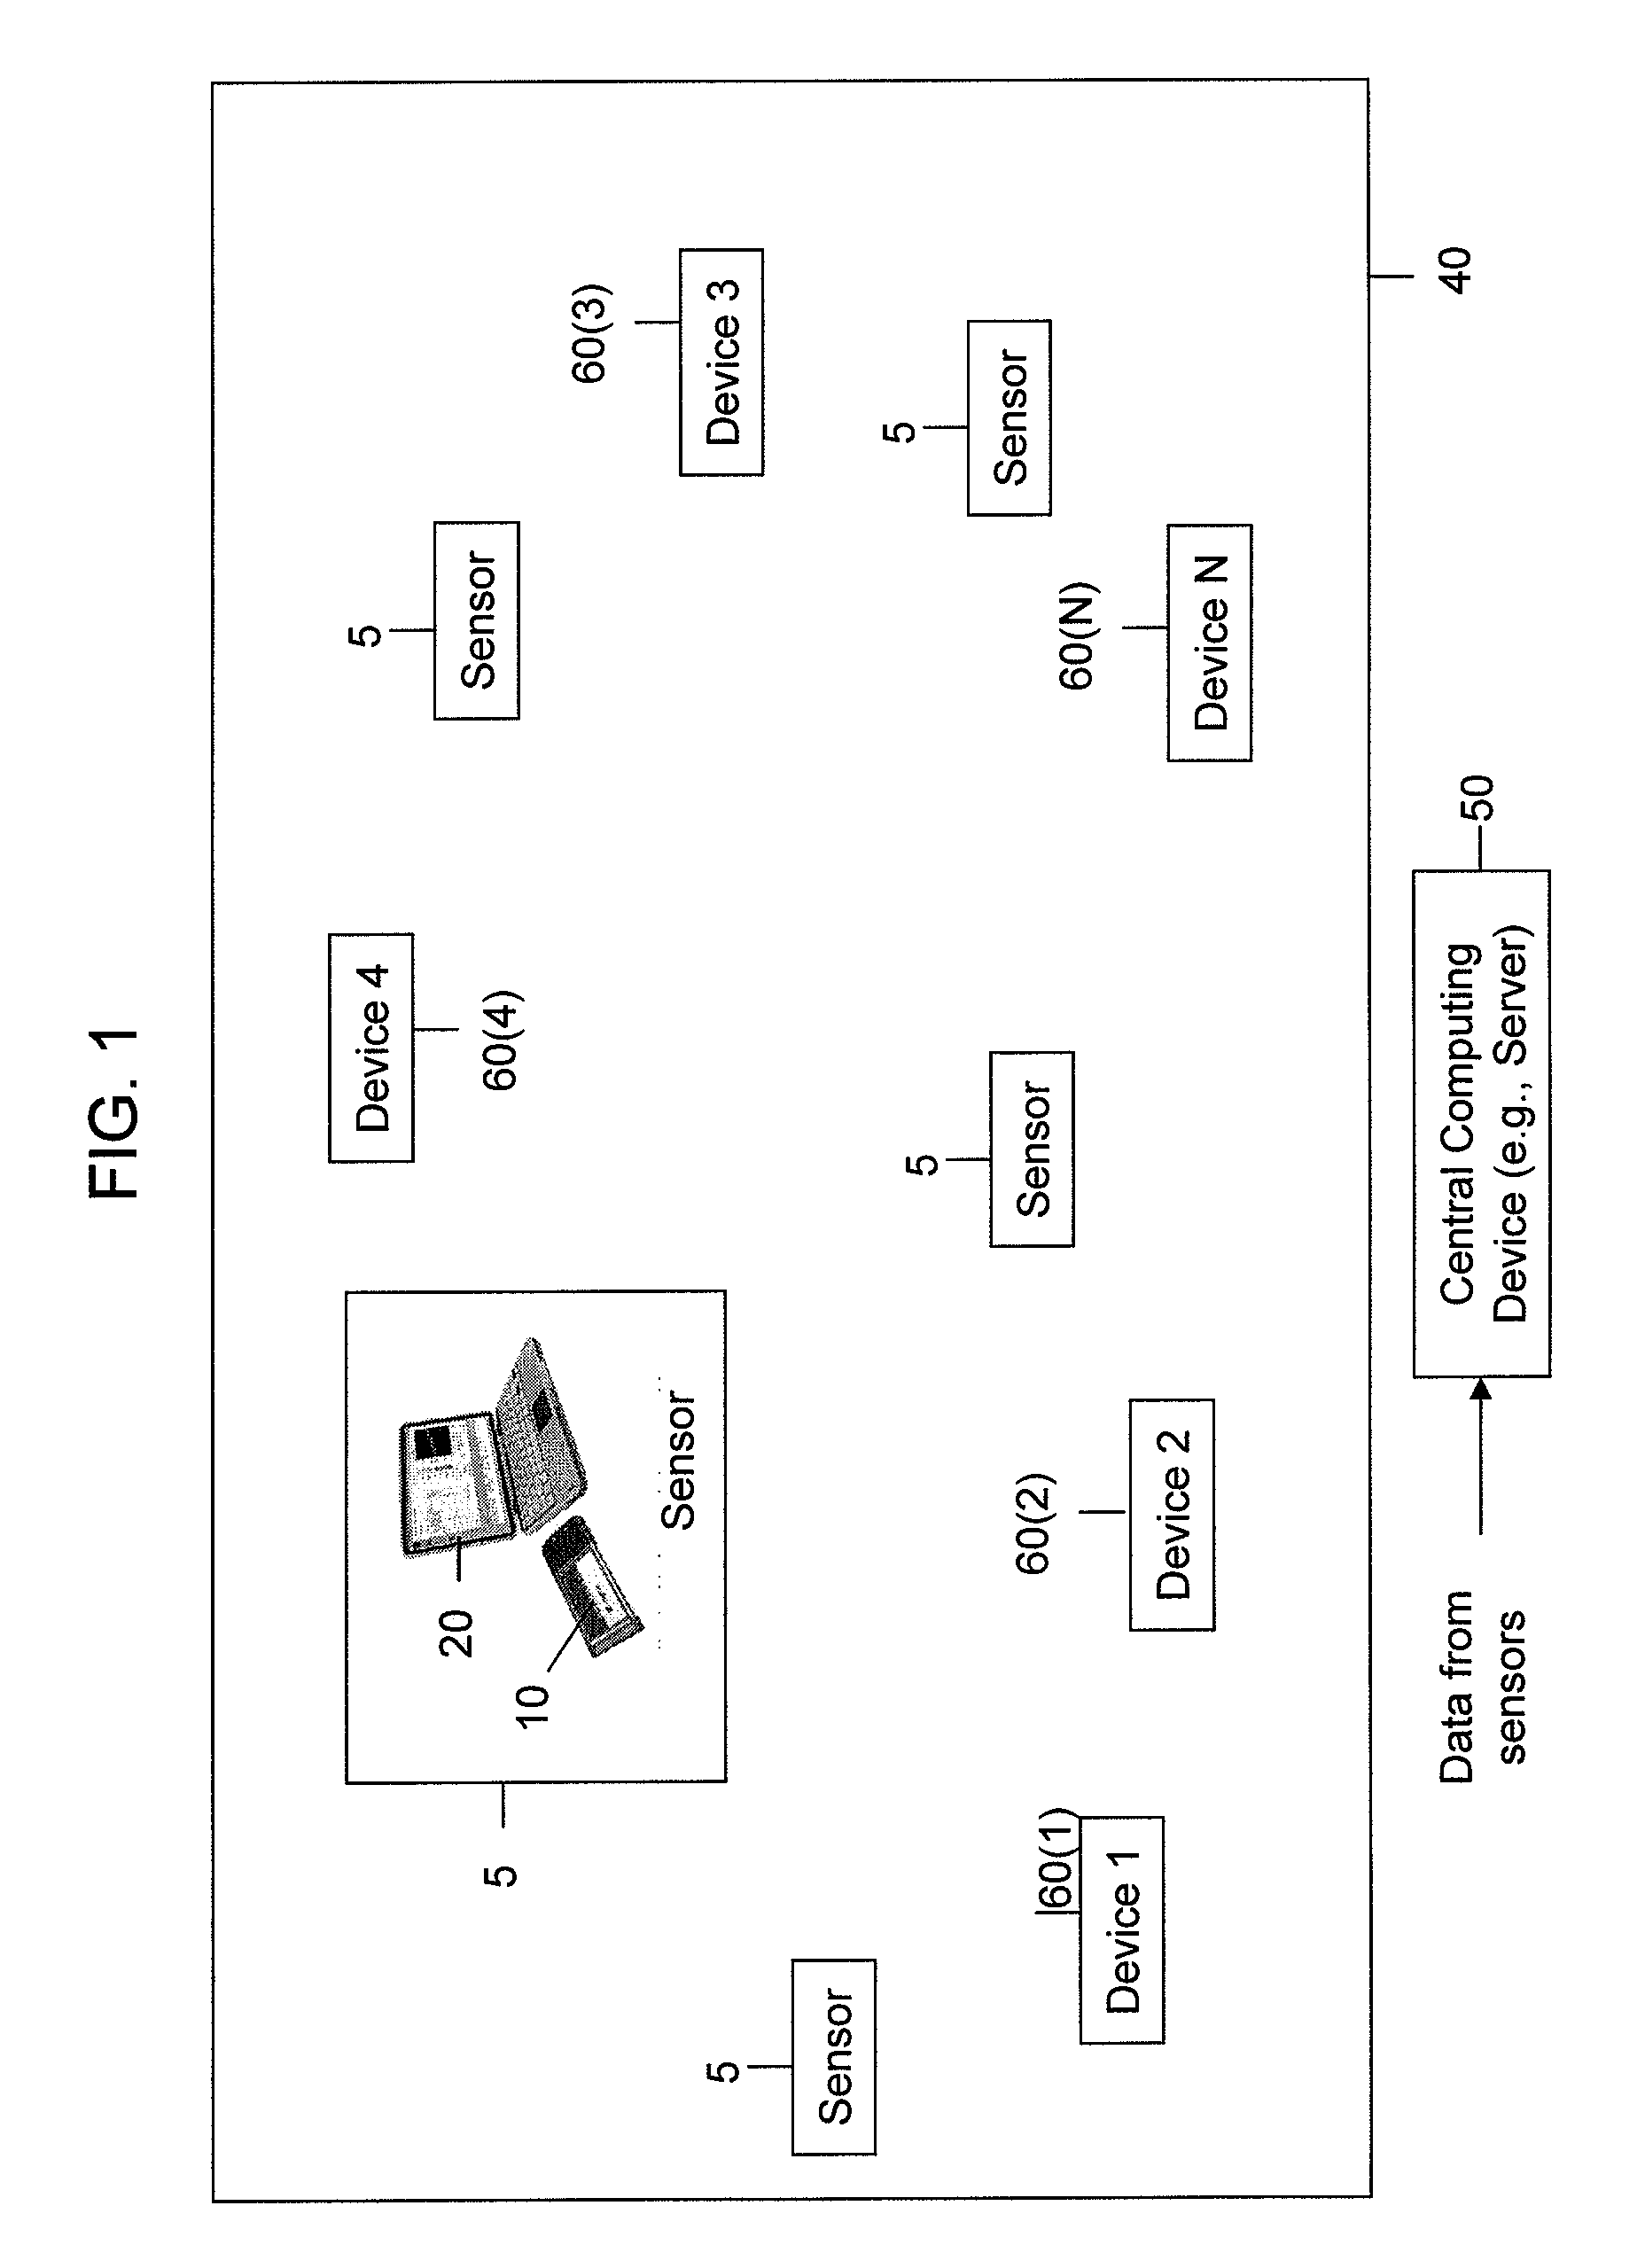 System and Method for Identifying Wireless Devices Using Pulse Fingerprinting and Sequence Analysis